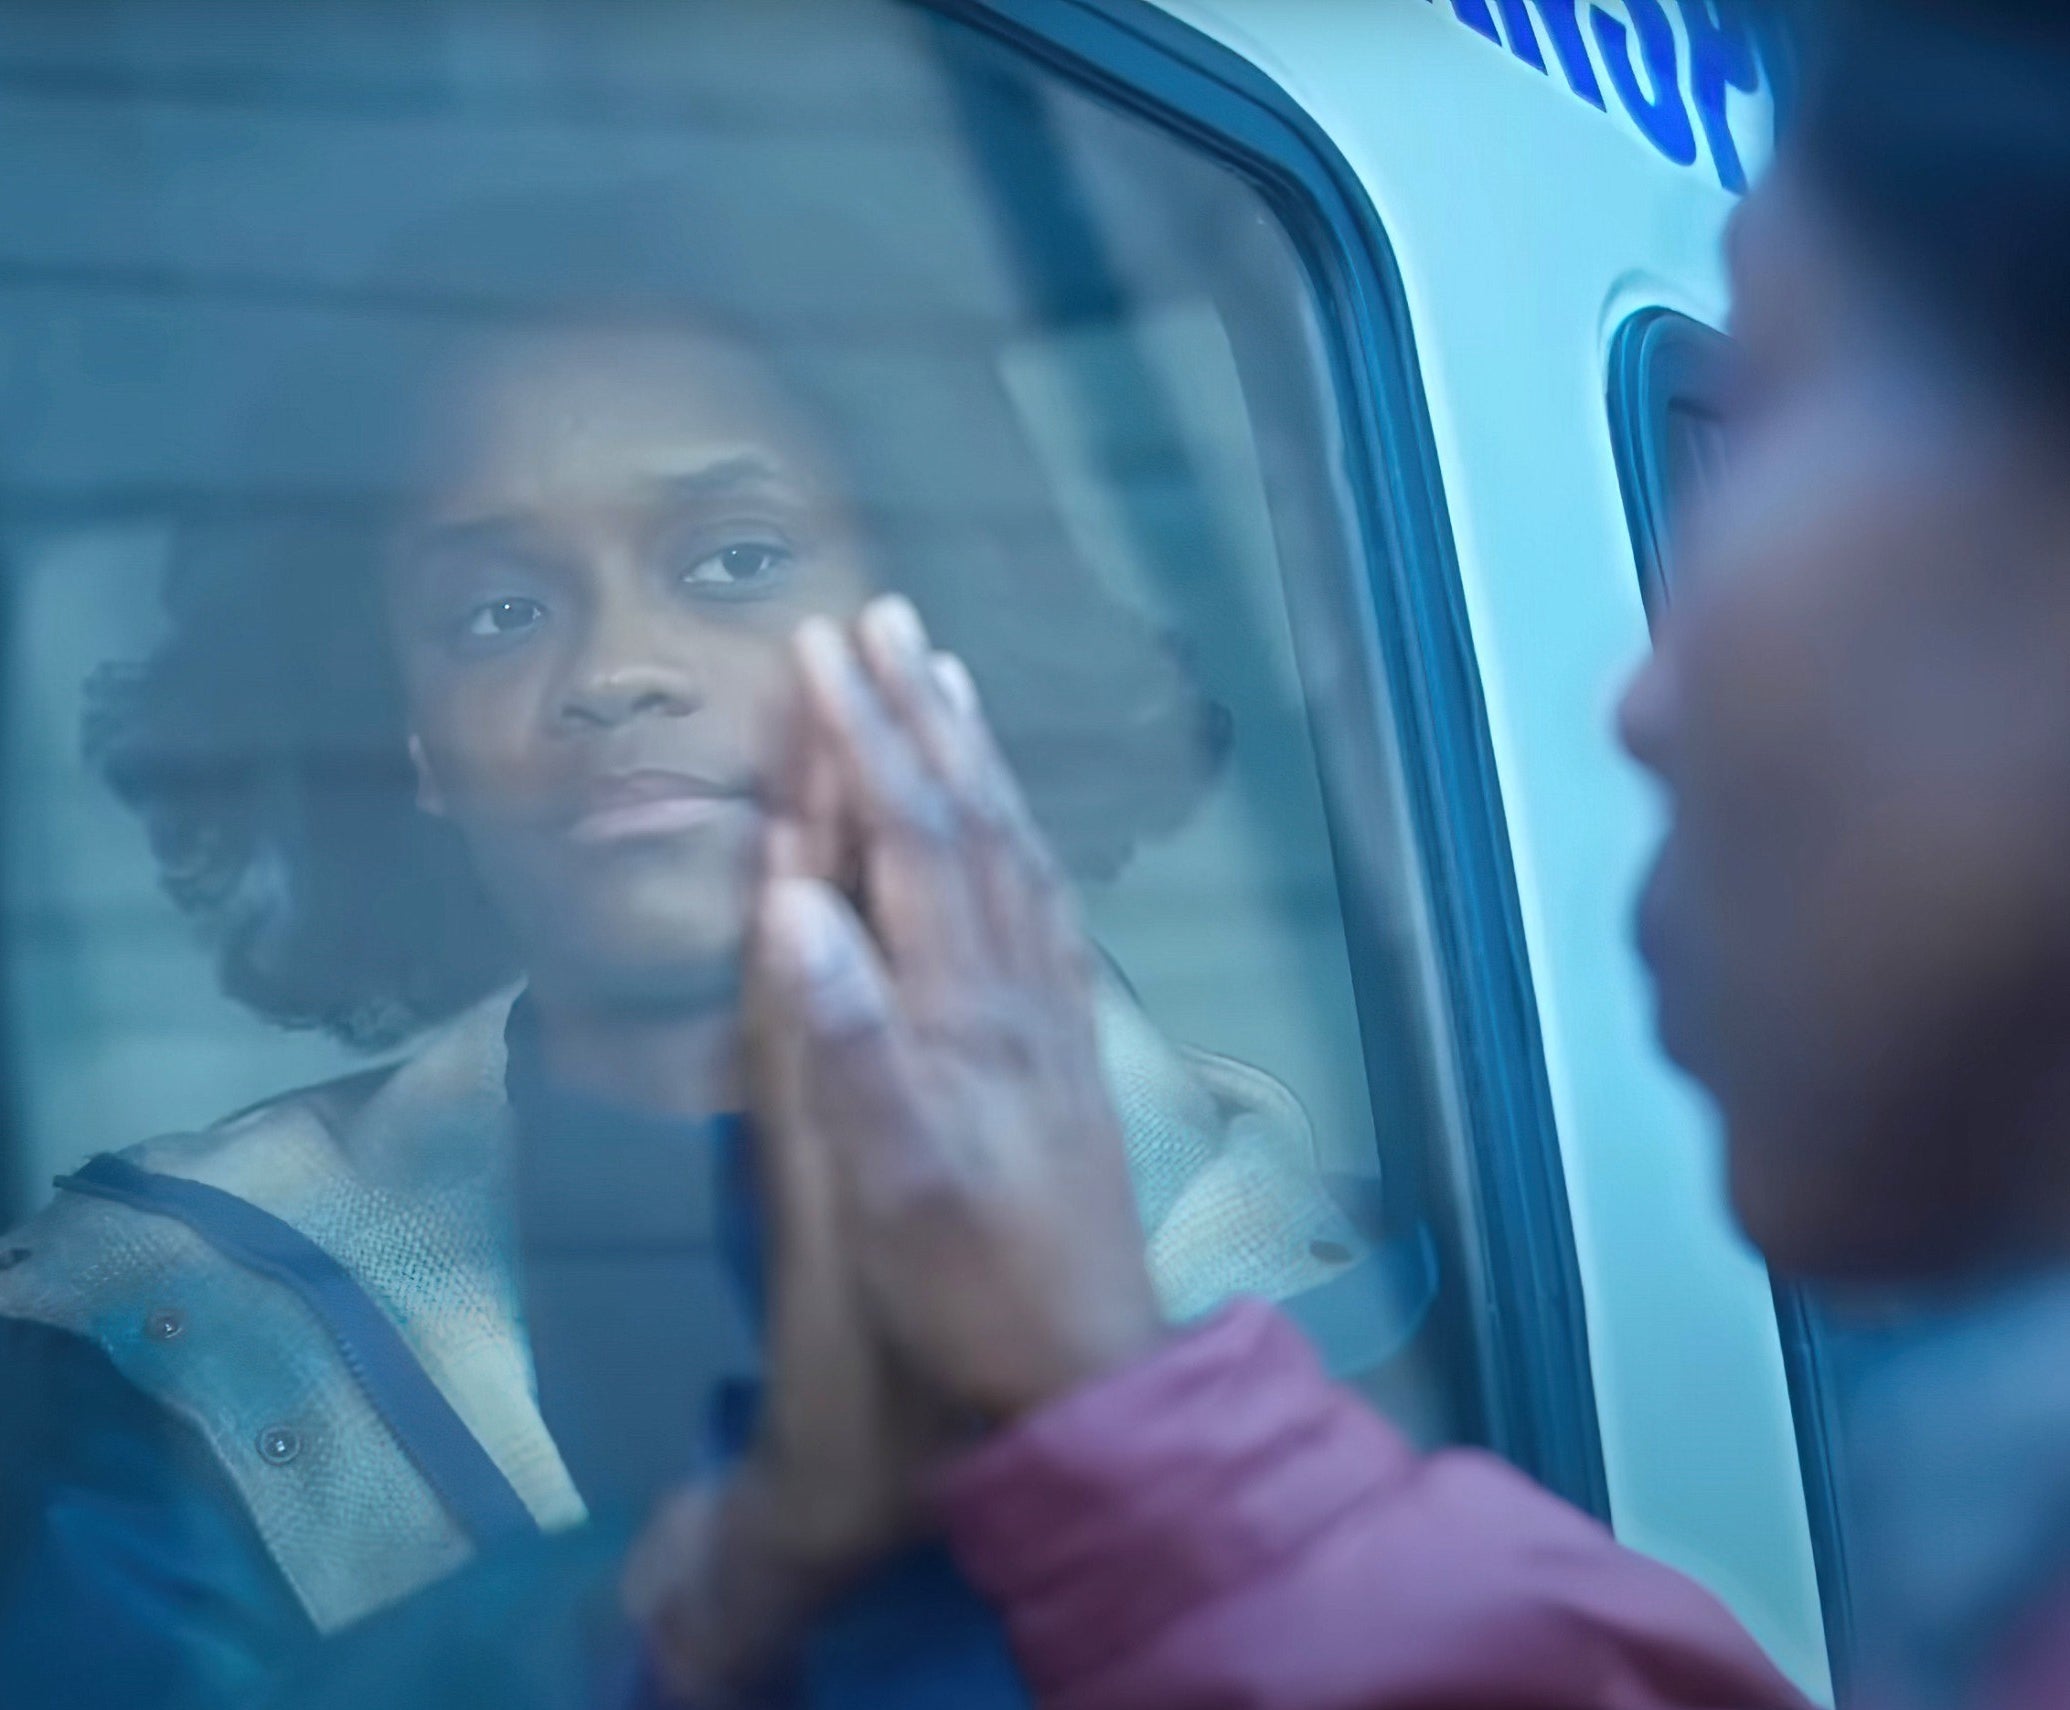 Letitia Wright in The Silent Twins sitting in a car with her hand up to the window